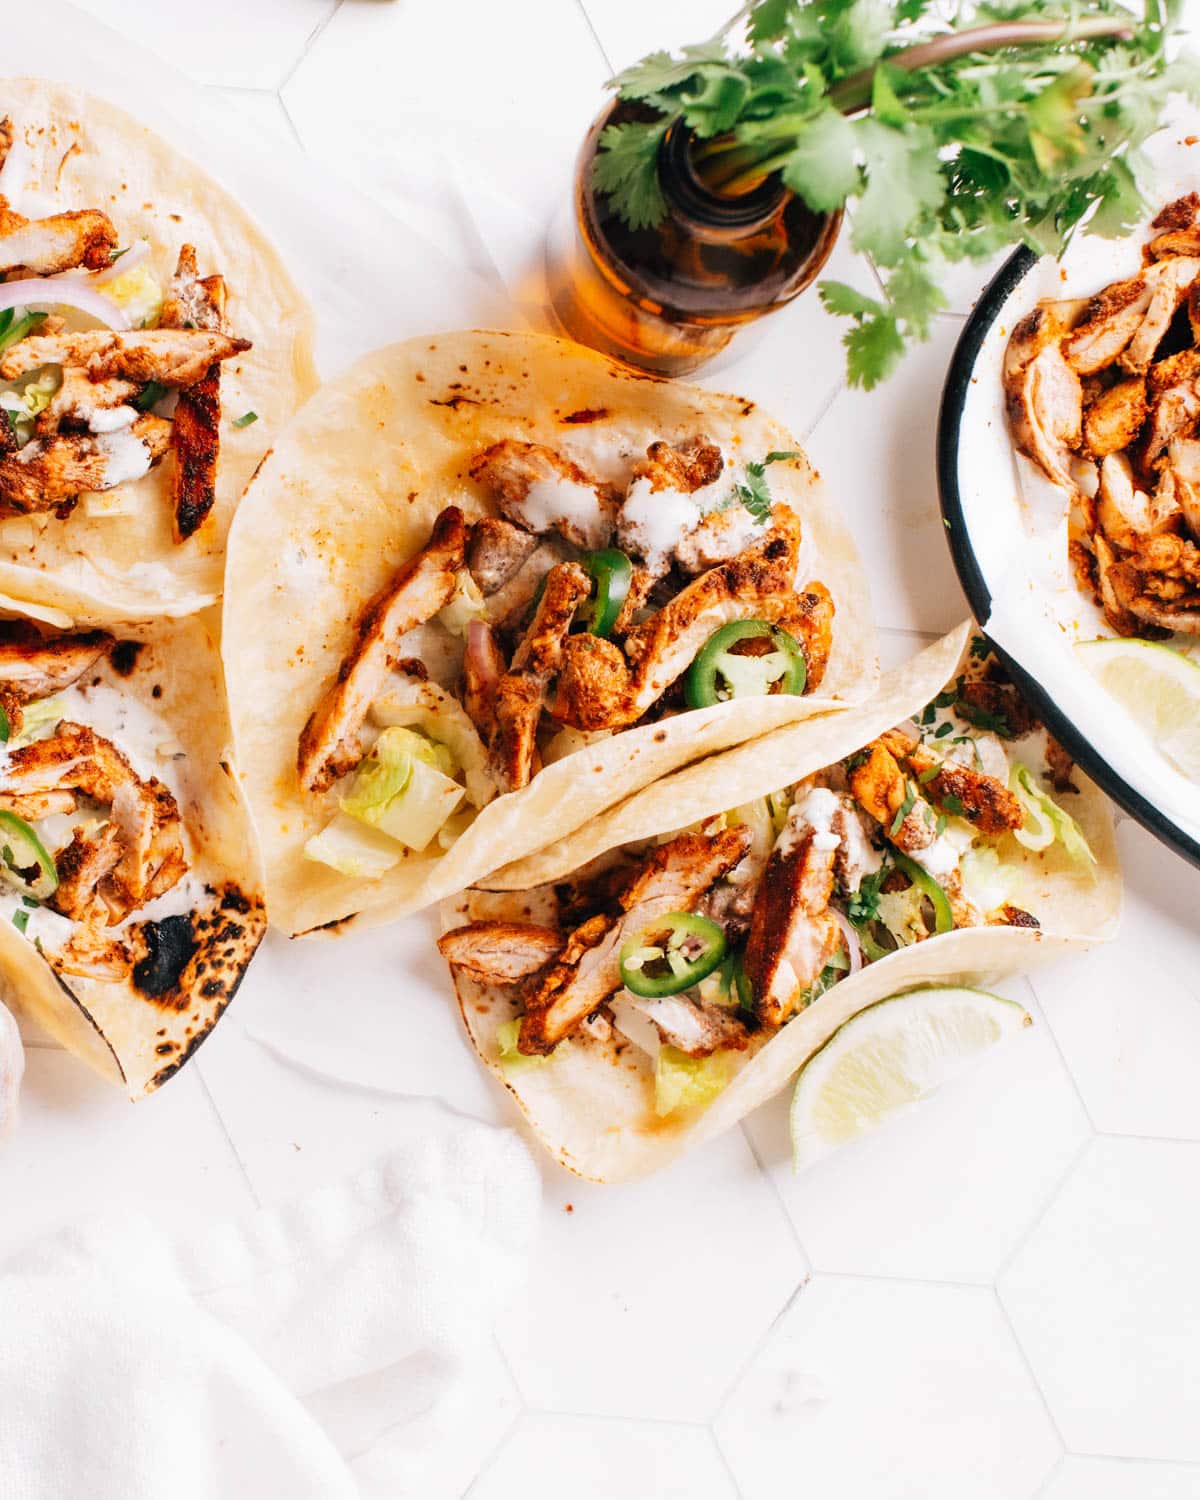 Ready-to-eat chicken street tacos topped with a dollop of cilantro lime crema and garnished with sliced onions and jalapeno.